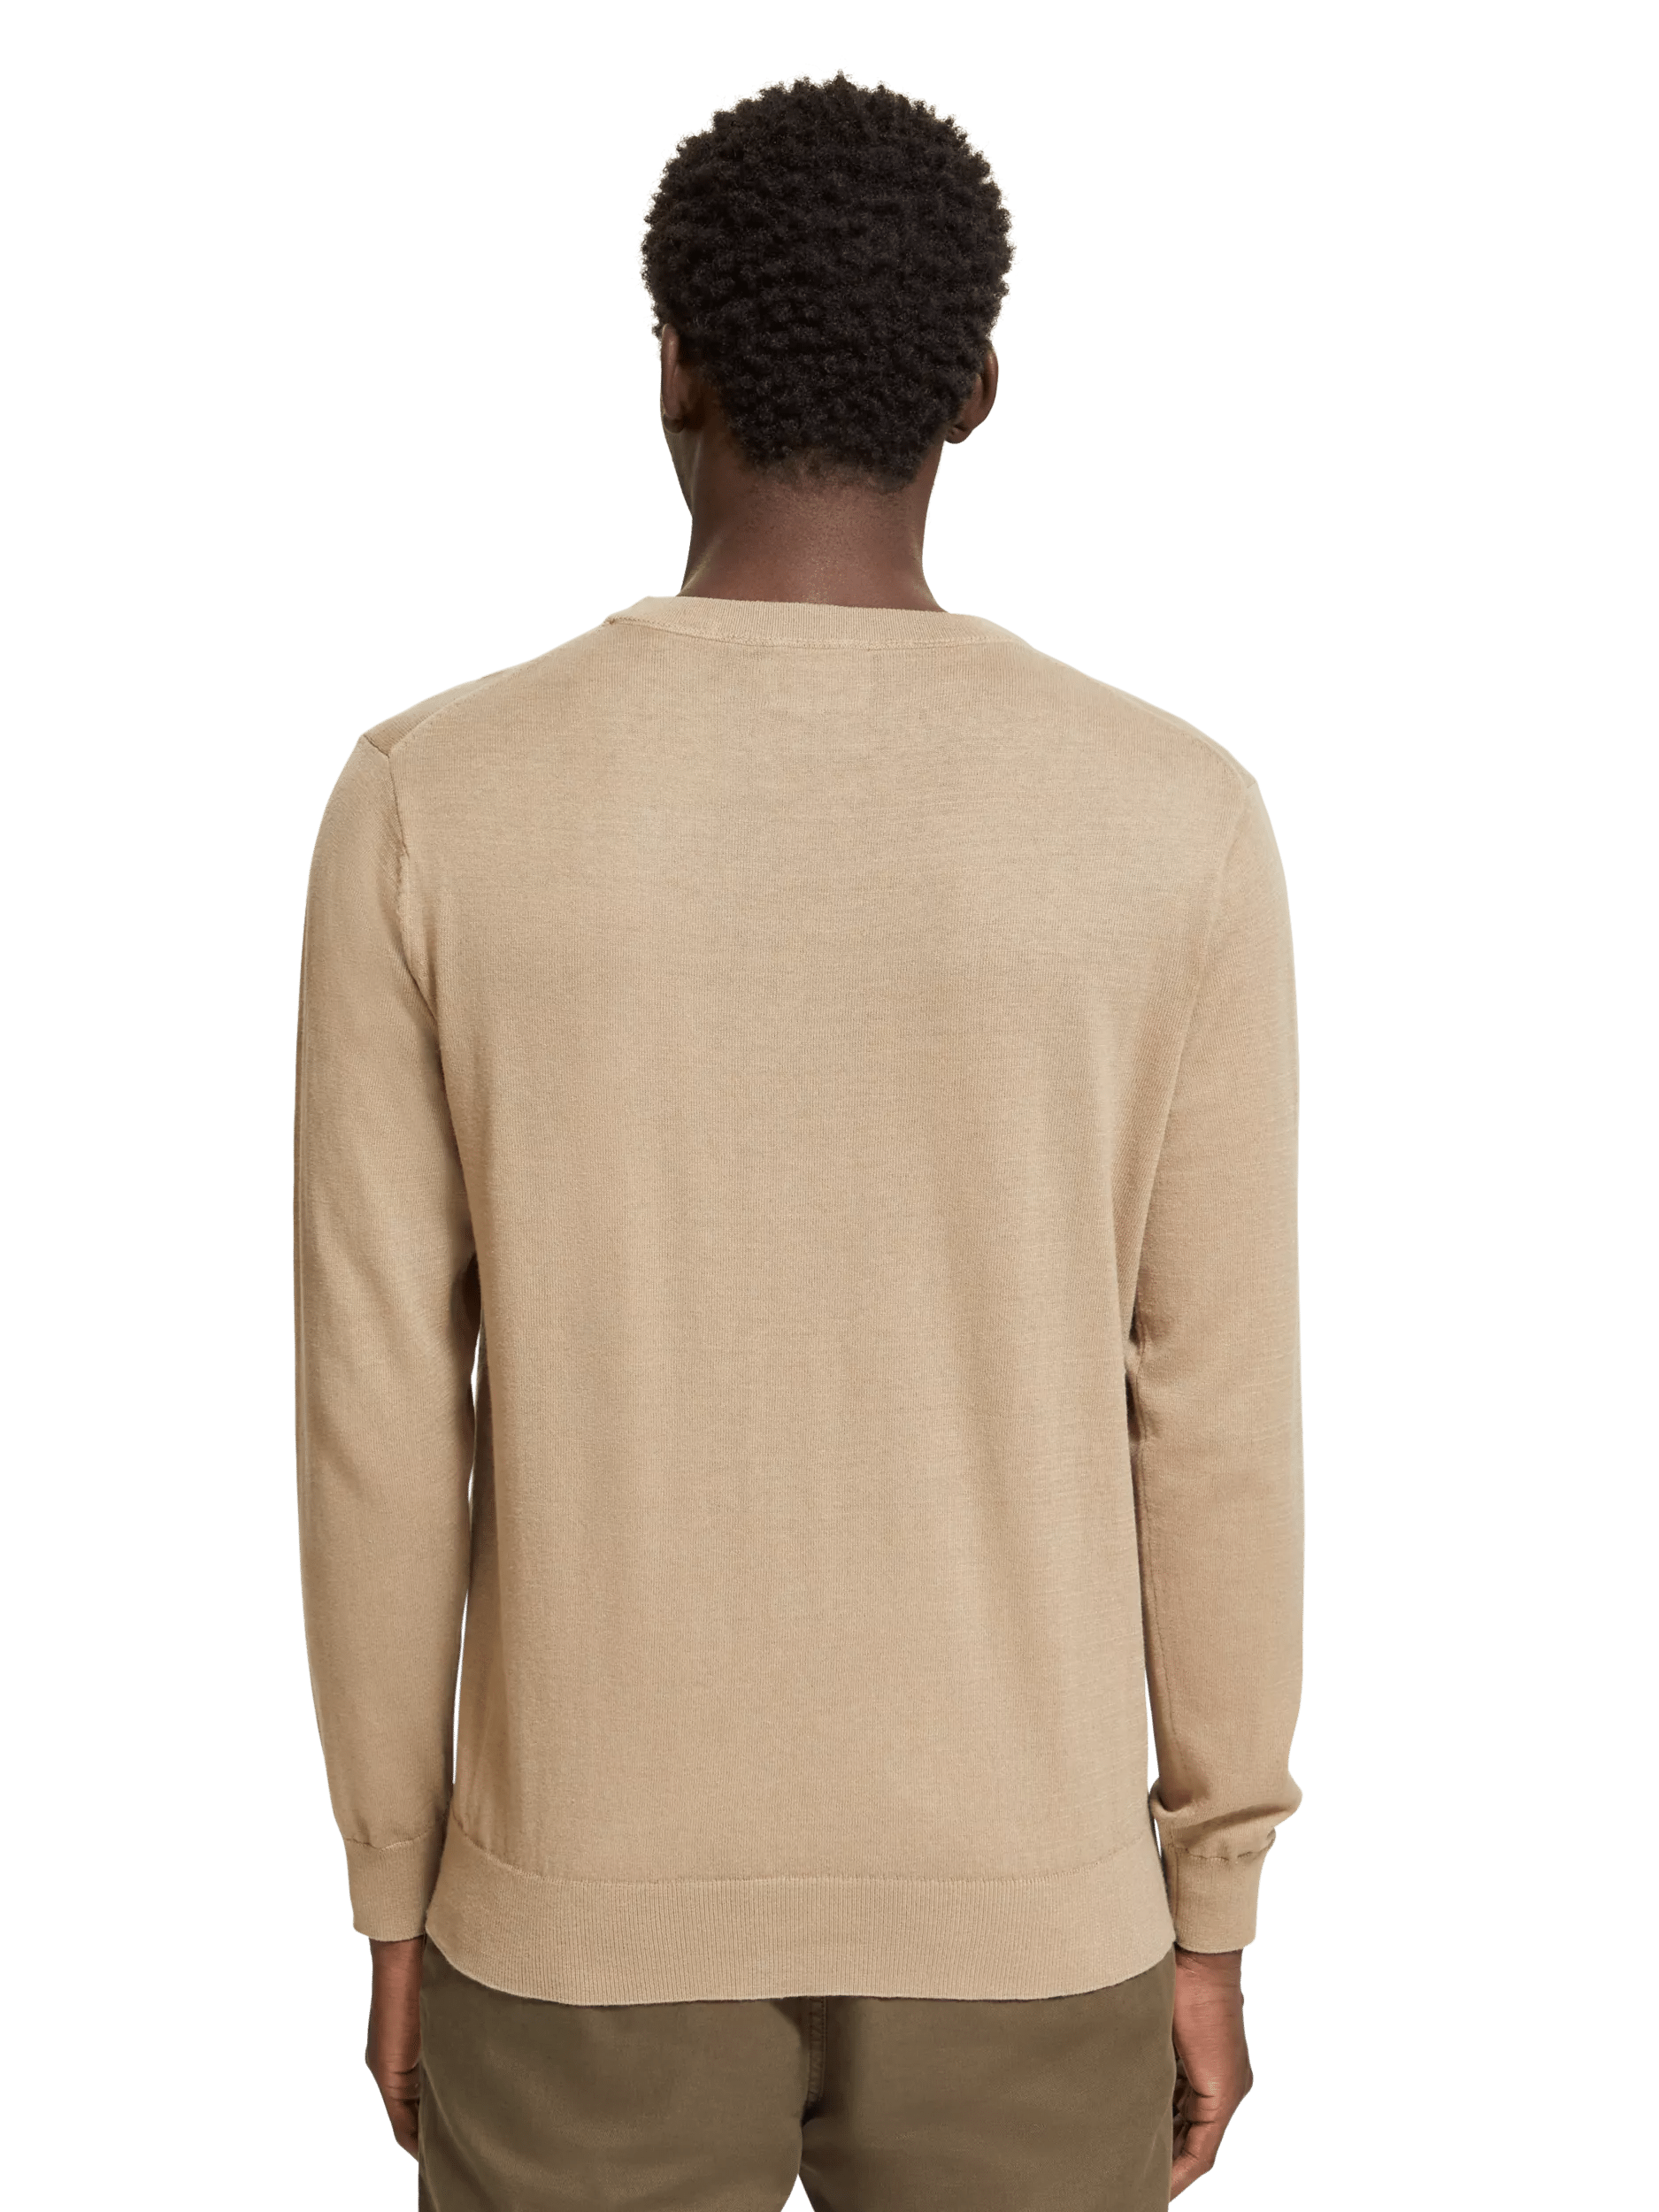 Scotch & Soda Linen-blended pullover sweater MDL-BCK